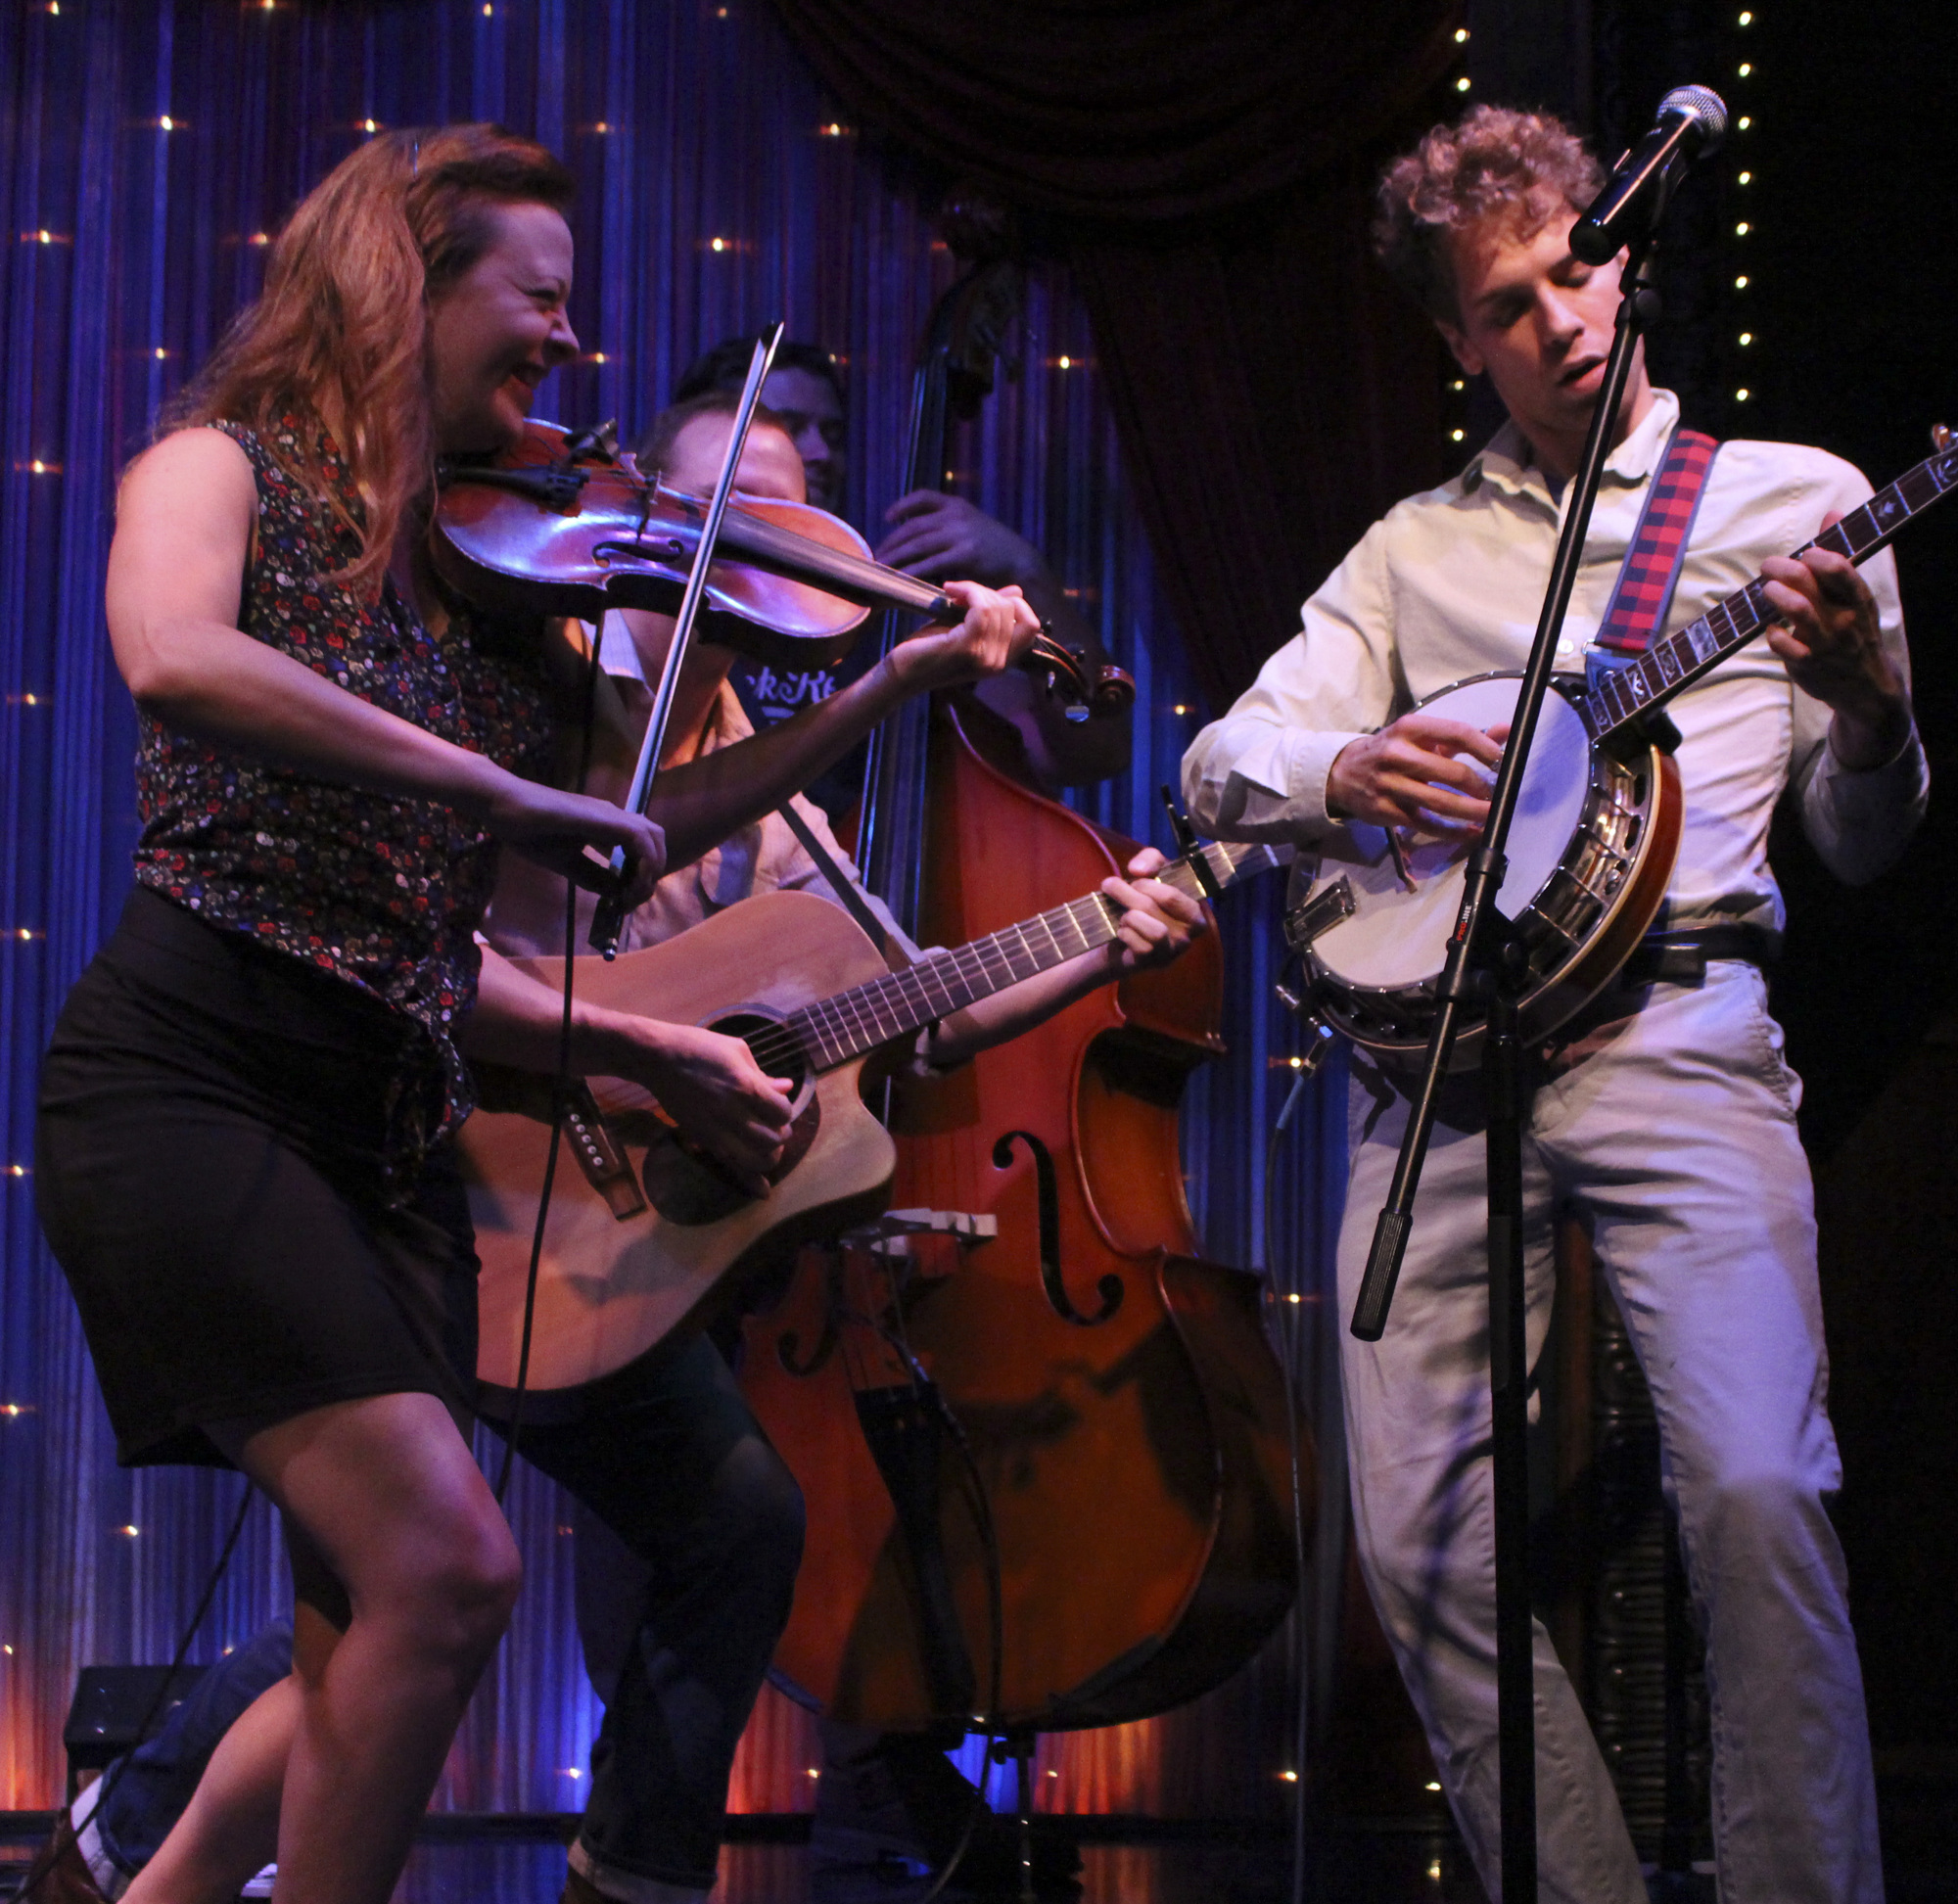 The Blue Eyed Bettys play self-described harmony-driven string music. Photo by Alexandria Hill.